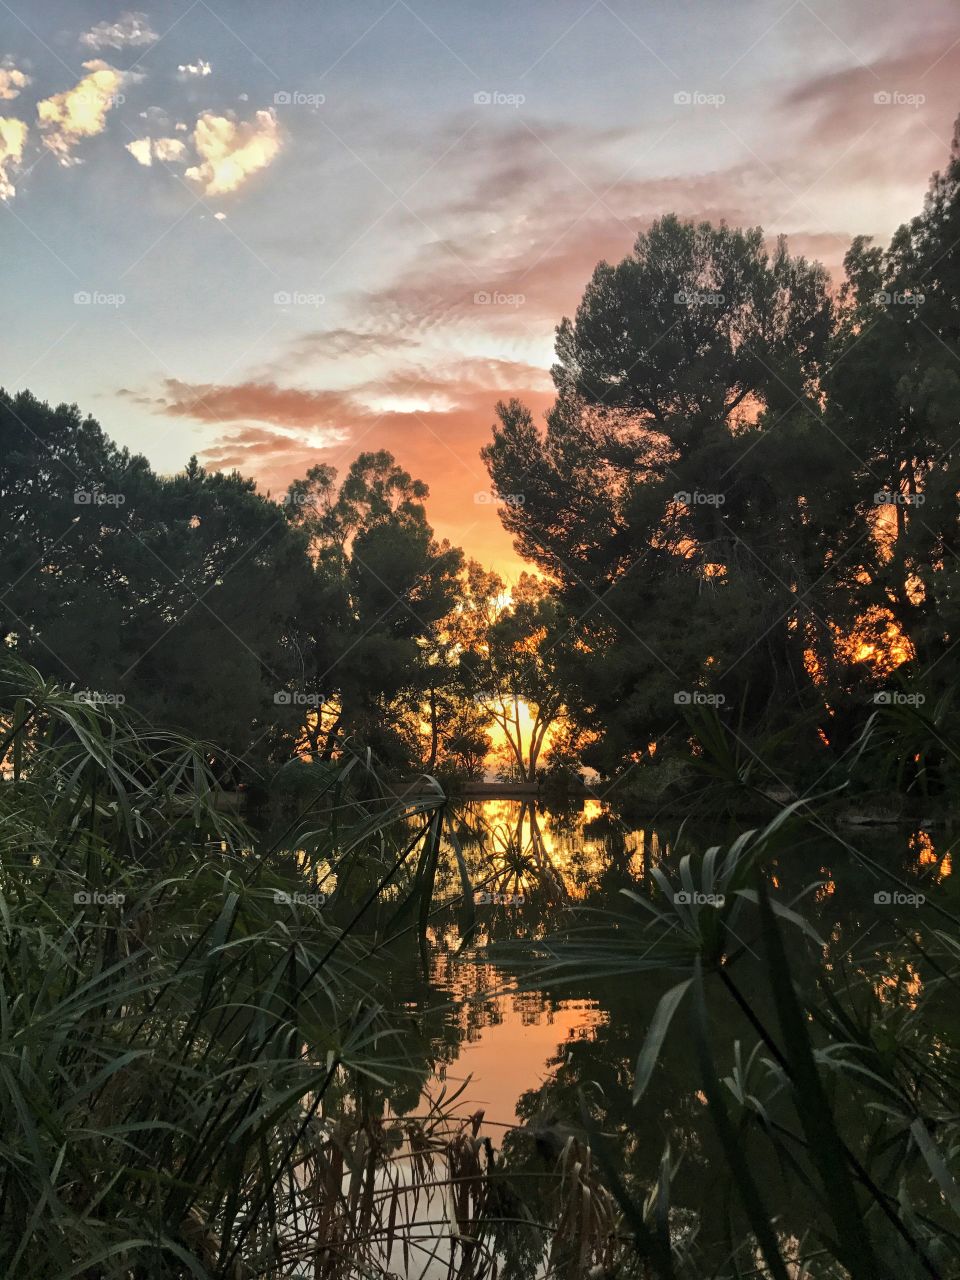 The sunset reflecting on the lake was magic! This was taken in Debs Park while hiking. 